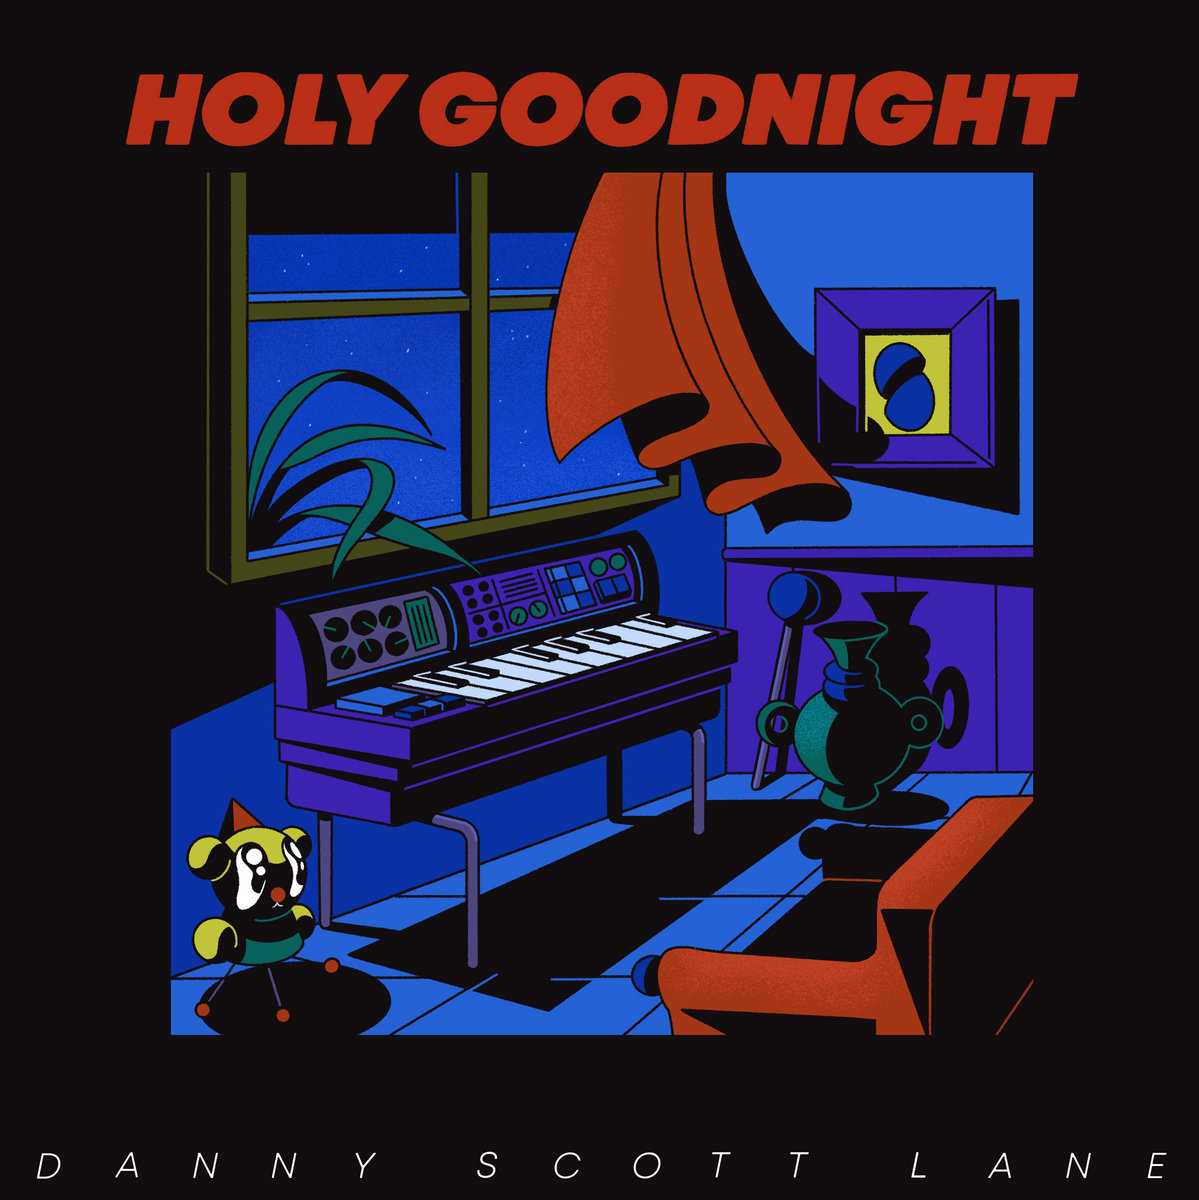 a0083969149 10 - Danny Scott Lane channels Japanese chic on ‘Holy Goodnight’